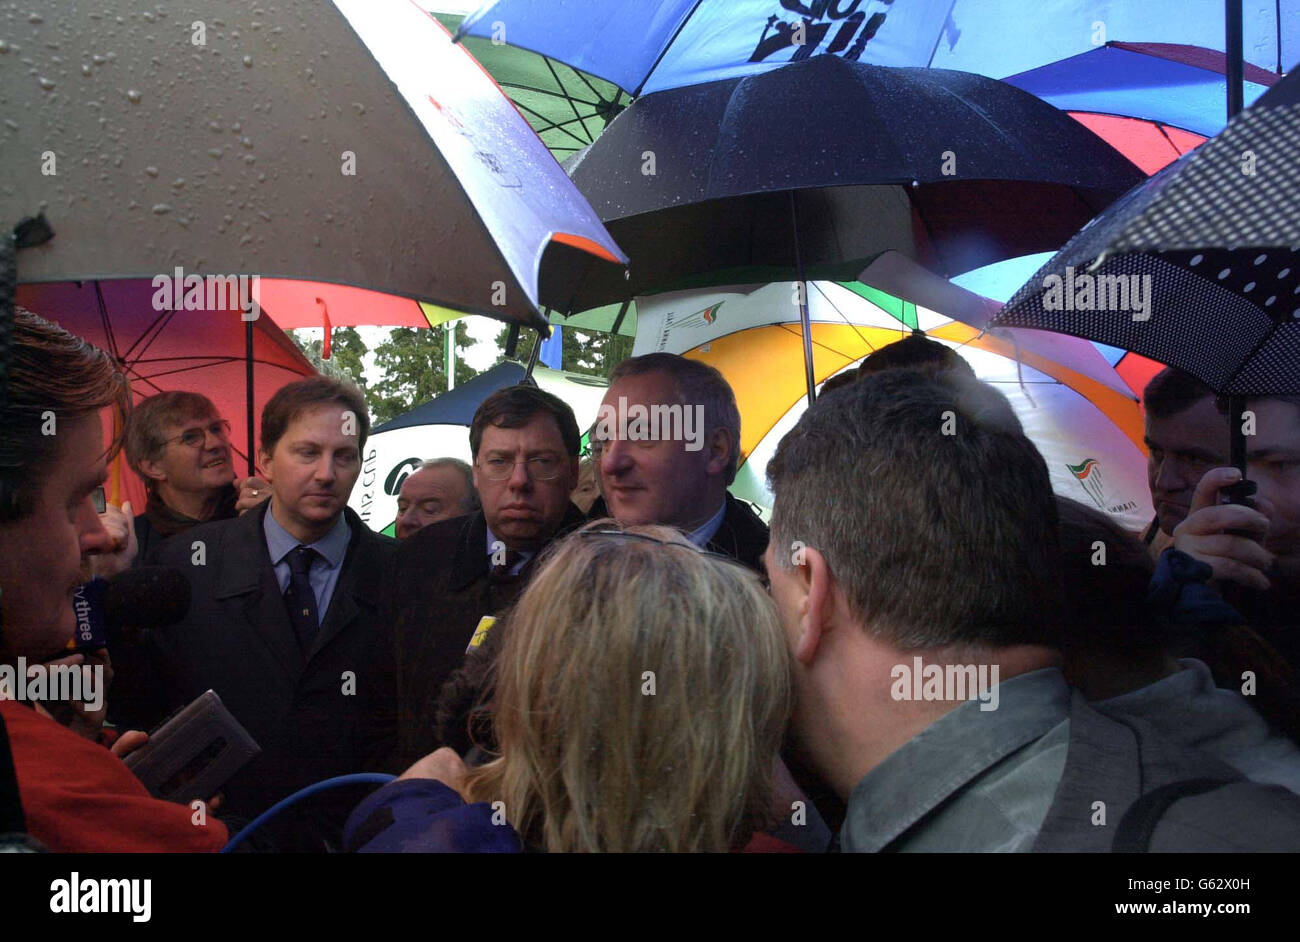 Irish Prime Minister Bertie Ahern, (centre, no spectacles) speaking to media under a canopy of umbrellas, after a commemorative event at Nationalist, Wolfe Tone's grave in Bodenstown, County Kildare, Republic of Ireland. * .. where he spoke to media about the disbandment of the paramilitary organisation, The Real IRA, in the wake of the suspension of the power sharing executive in the government of Northern Ireland. Stock Photo